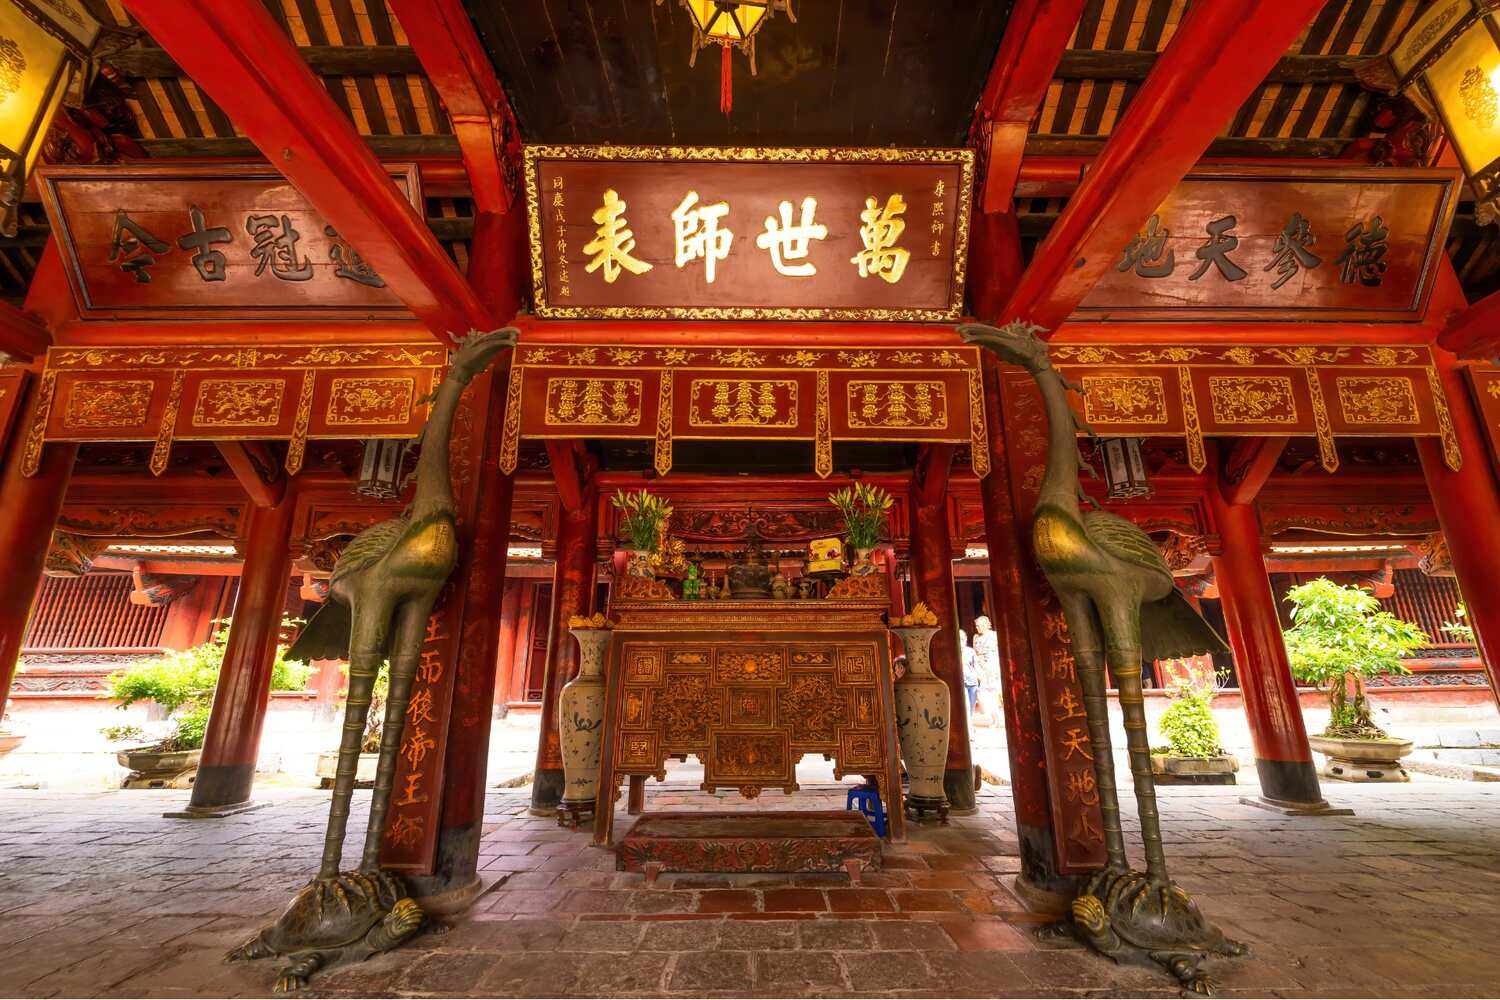 Intricate altar and ornate wooden beams inside the historic Temple of Literature in Hanoi.